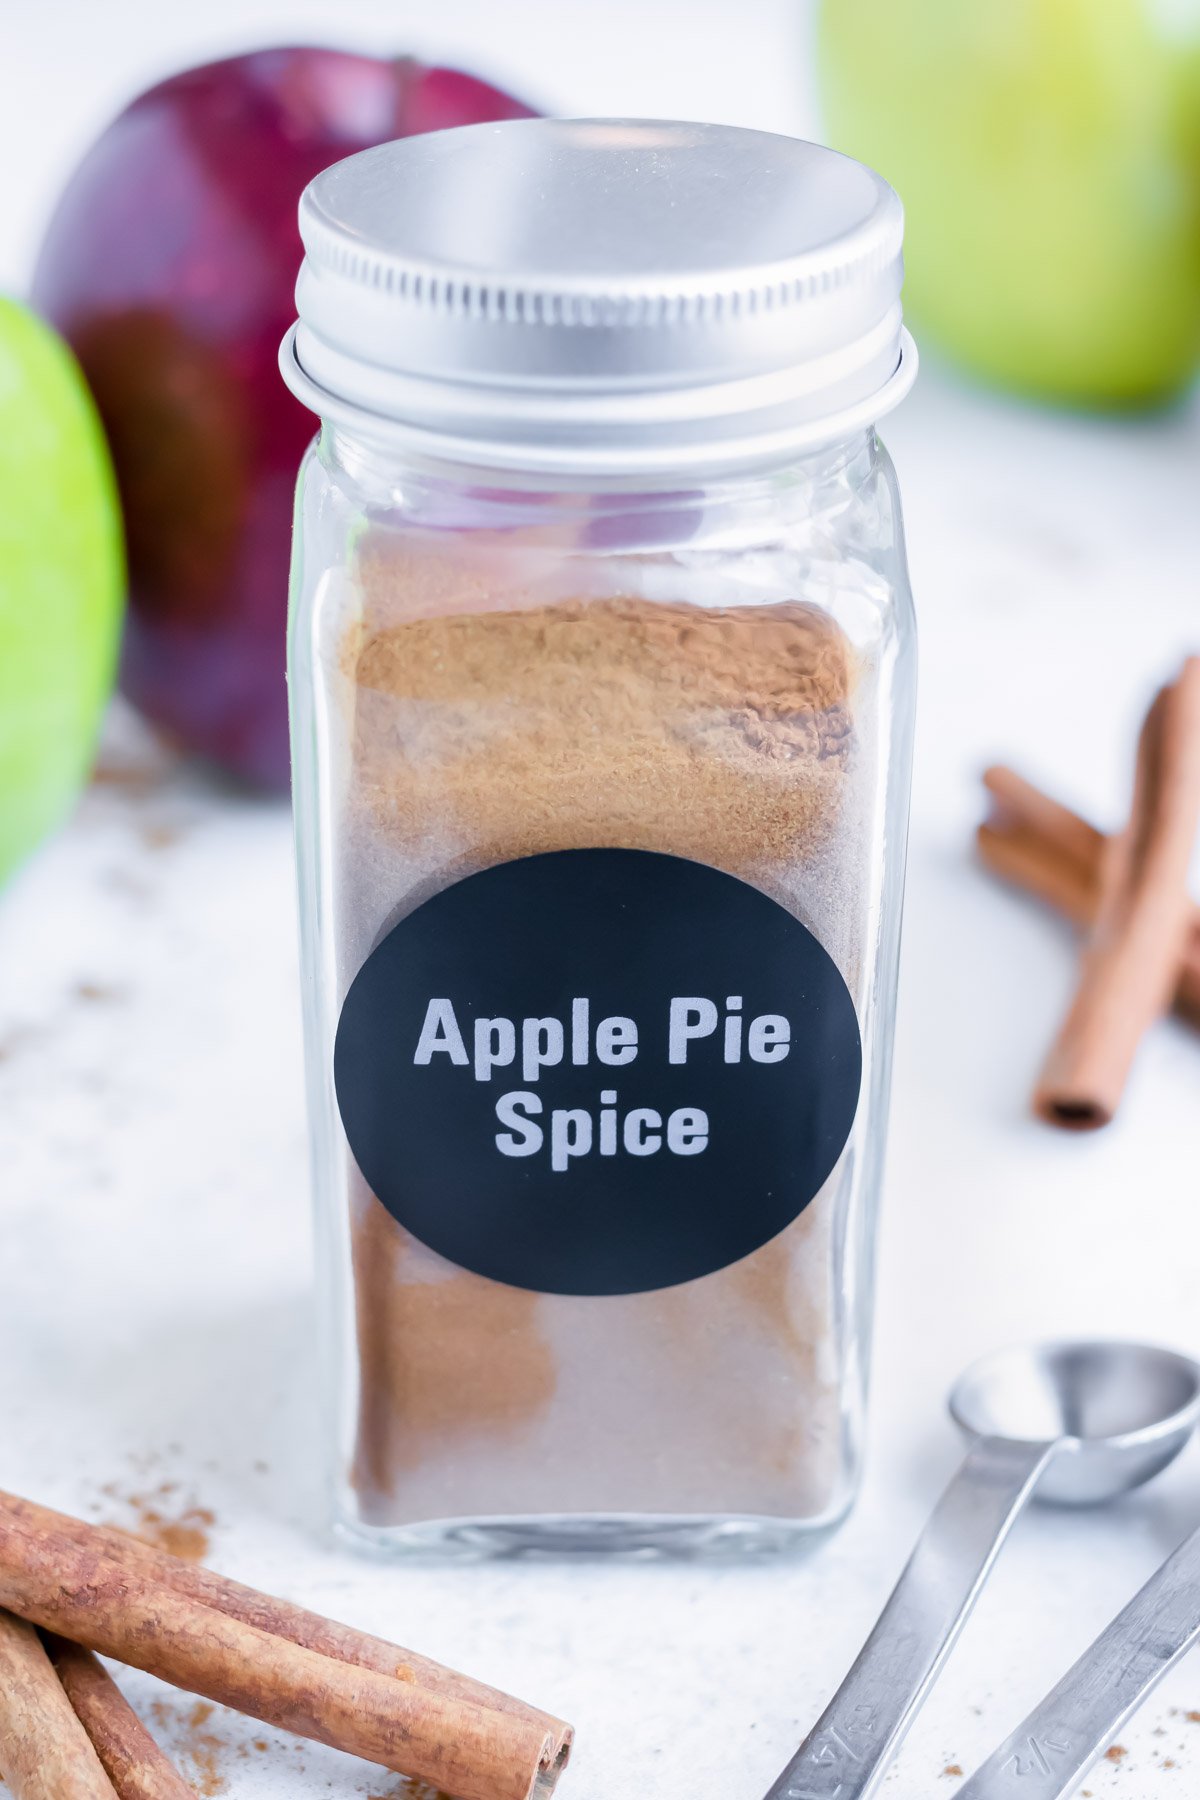 Use apple pie spice in cakes, pies, breads, and muffins.